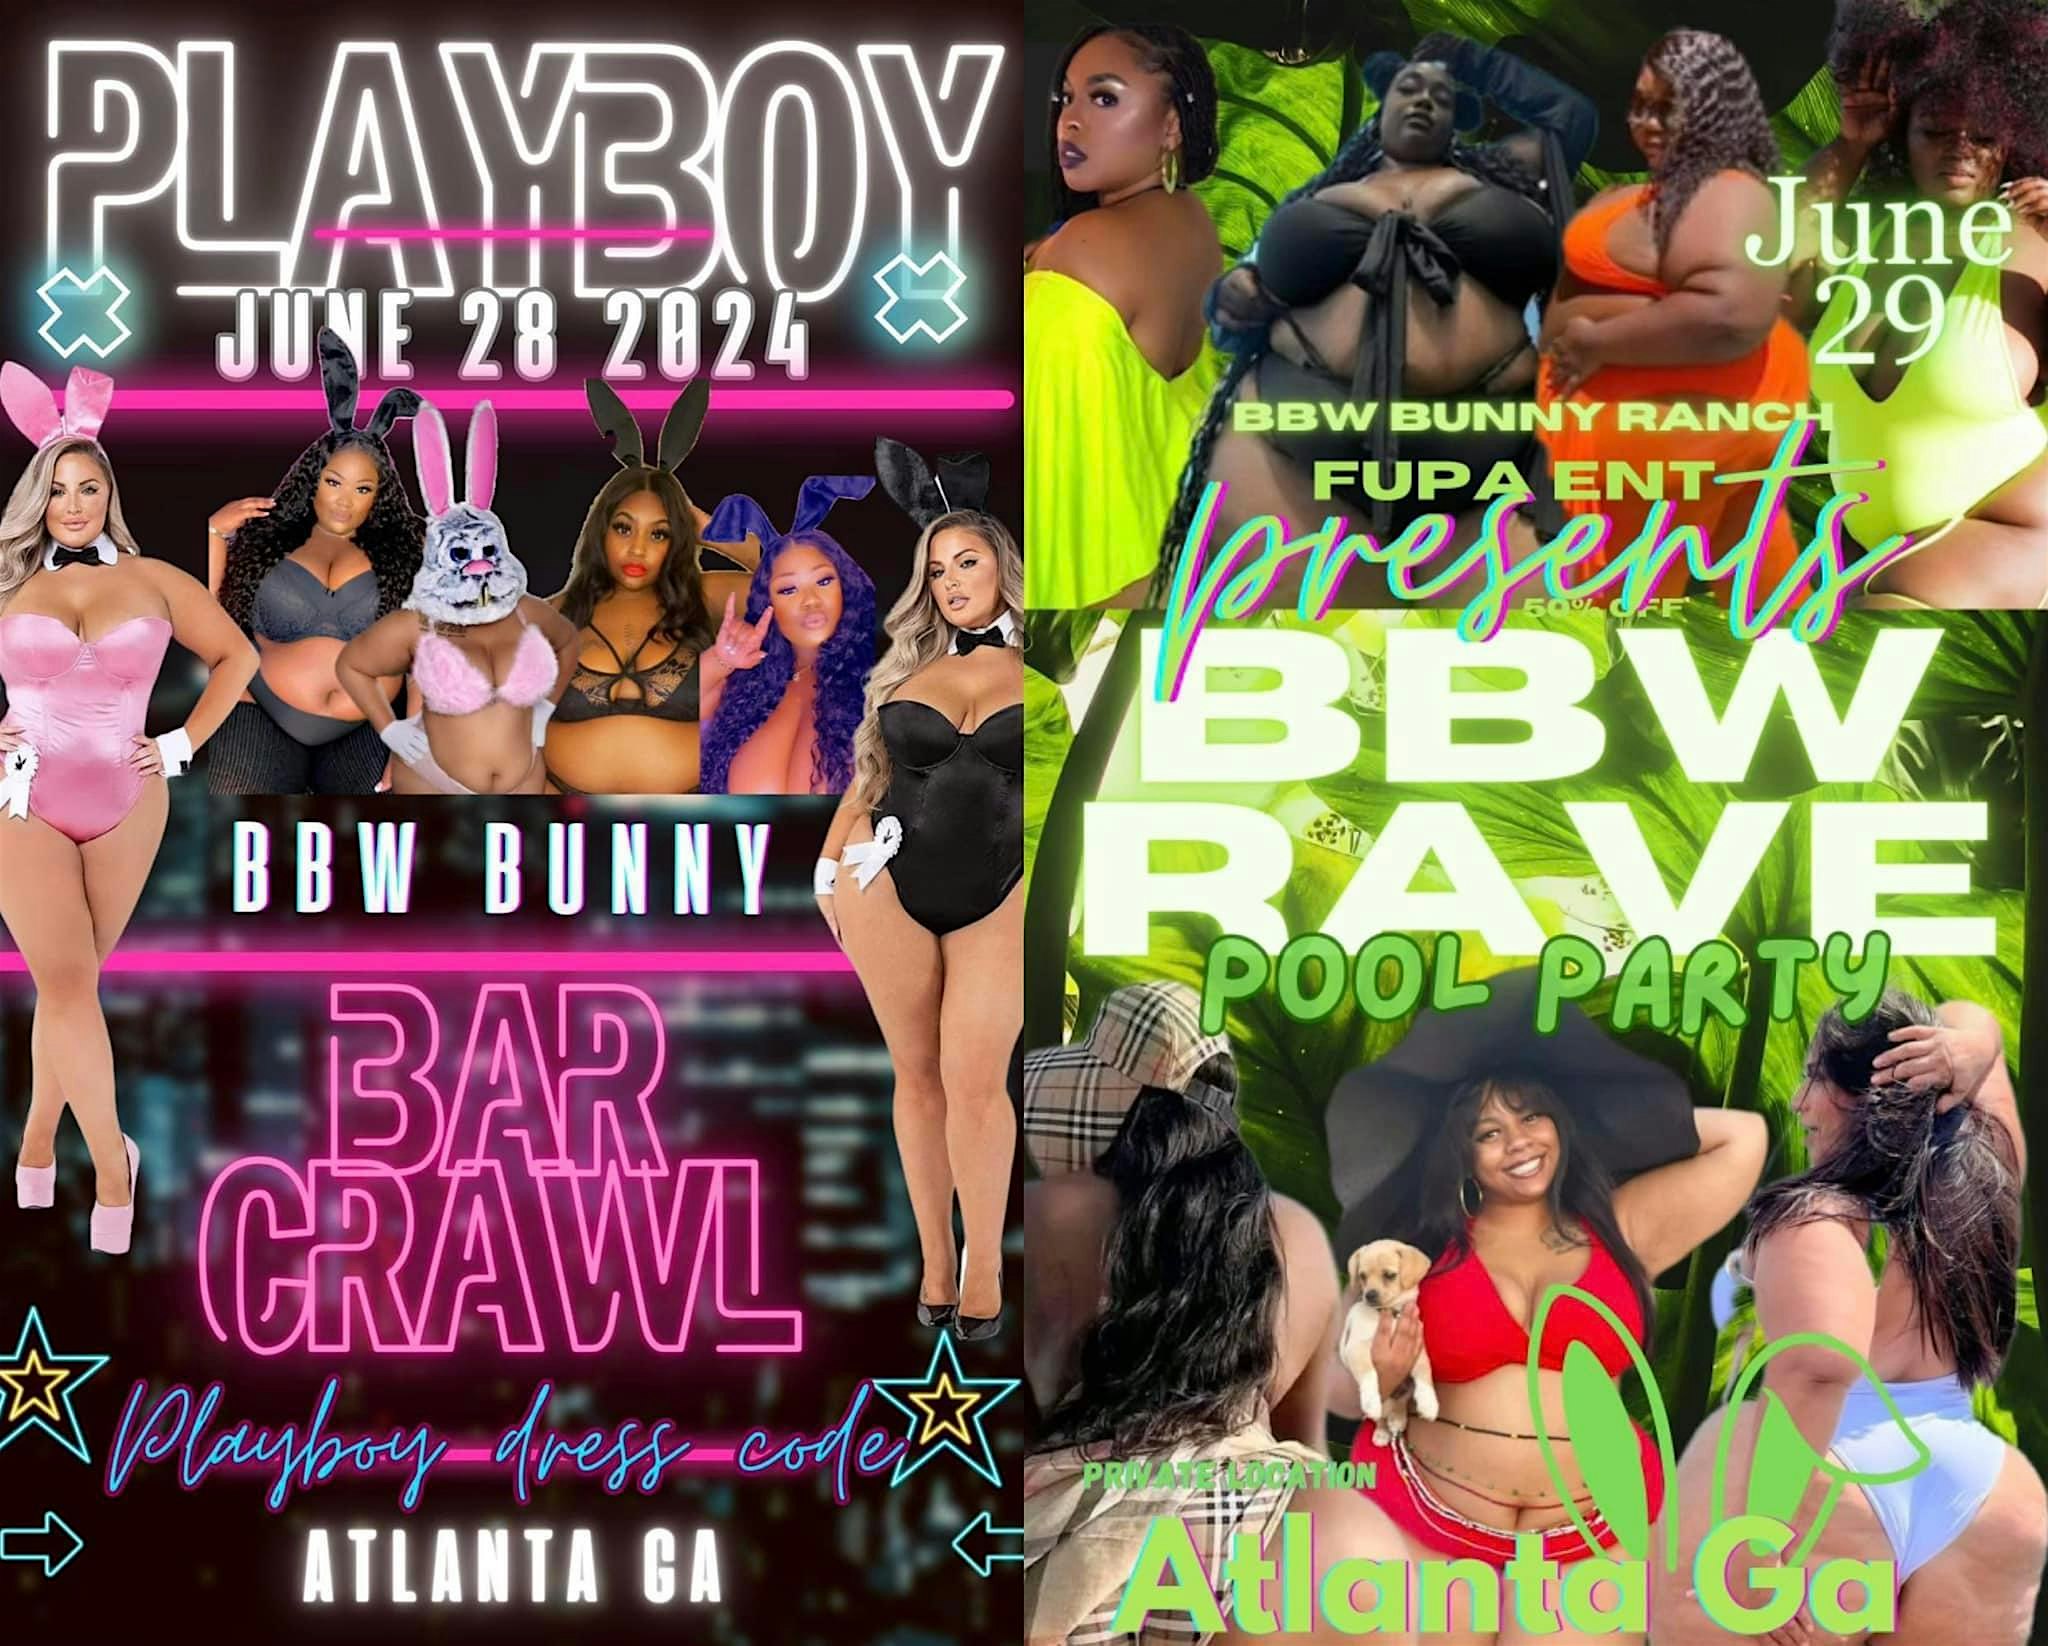 The BBW Bunny Ranch and FUPA Ent. The BBW Pool Party and Party Bus